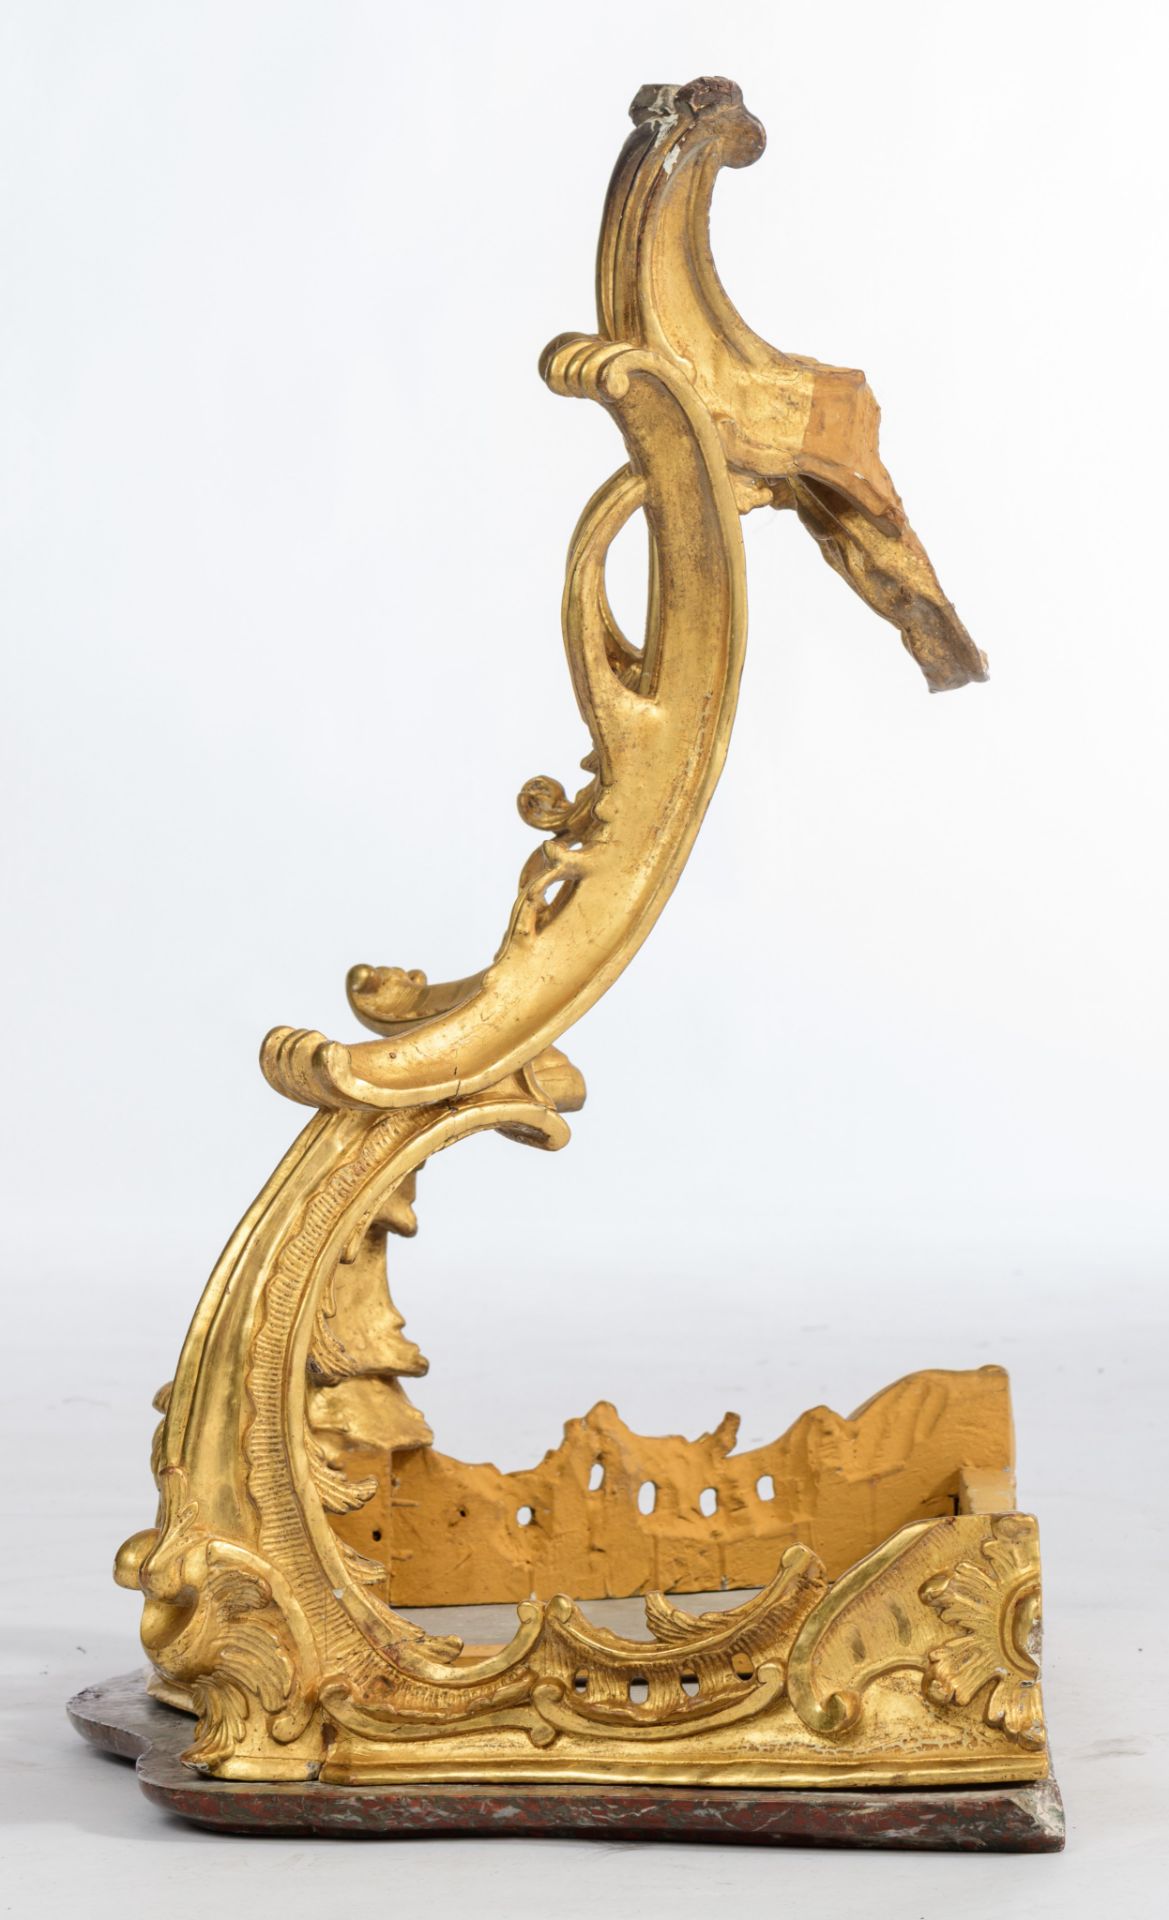 A richly carved giltwood Rococo console table, mid 18thC, H 83 - W 81,5 - D 48,5 cm - Image 3 of 11